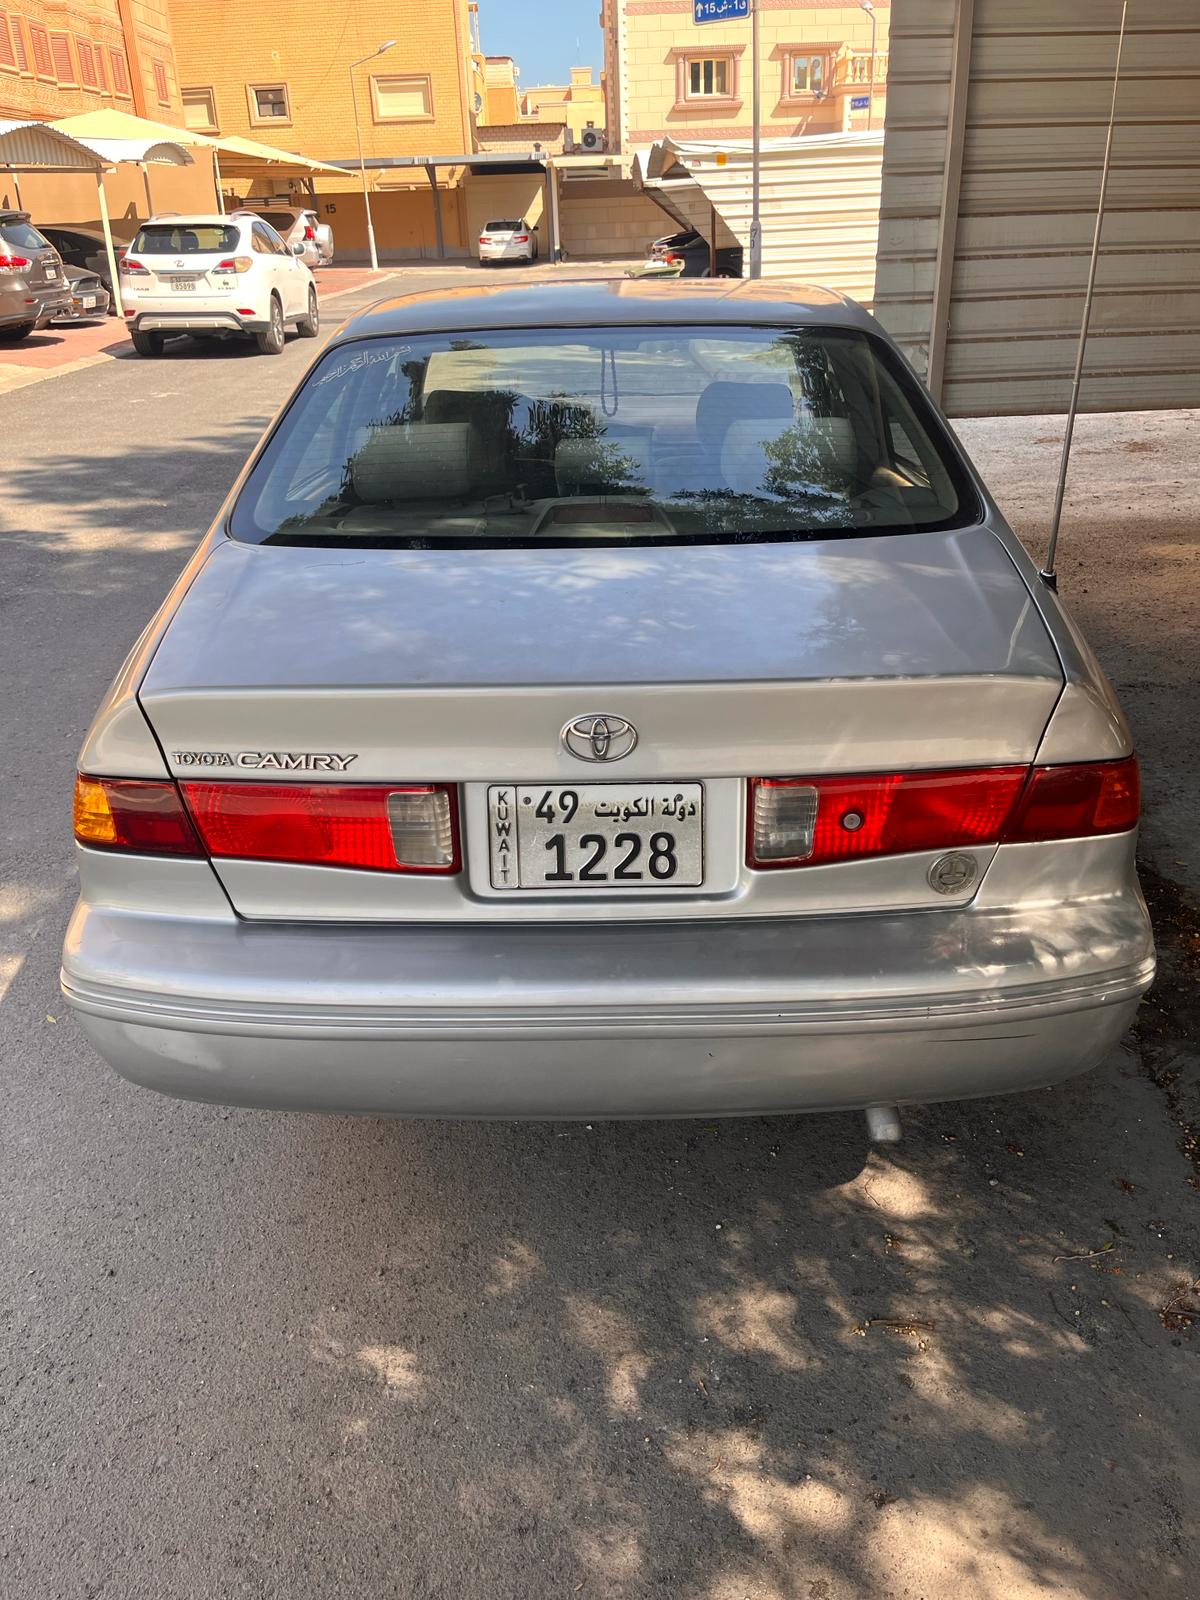 TOYOTA CAMRY FOR SALE IN GOOD CONDITION